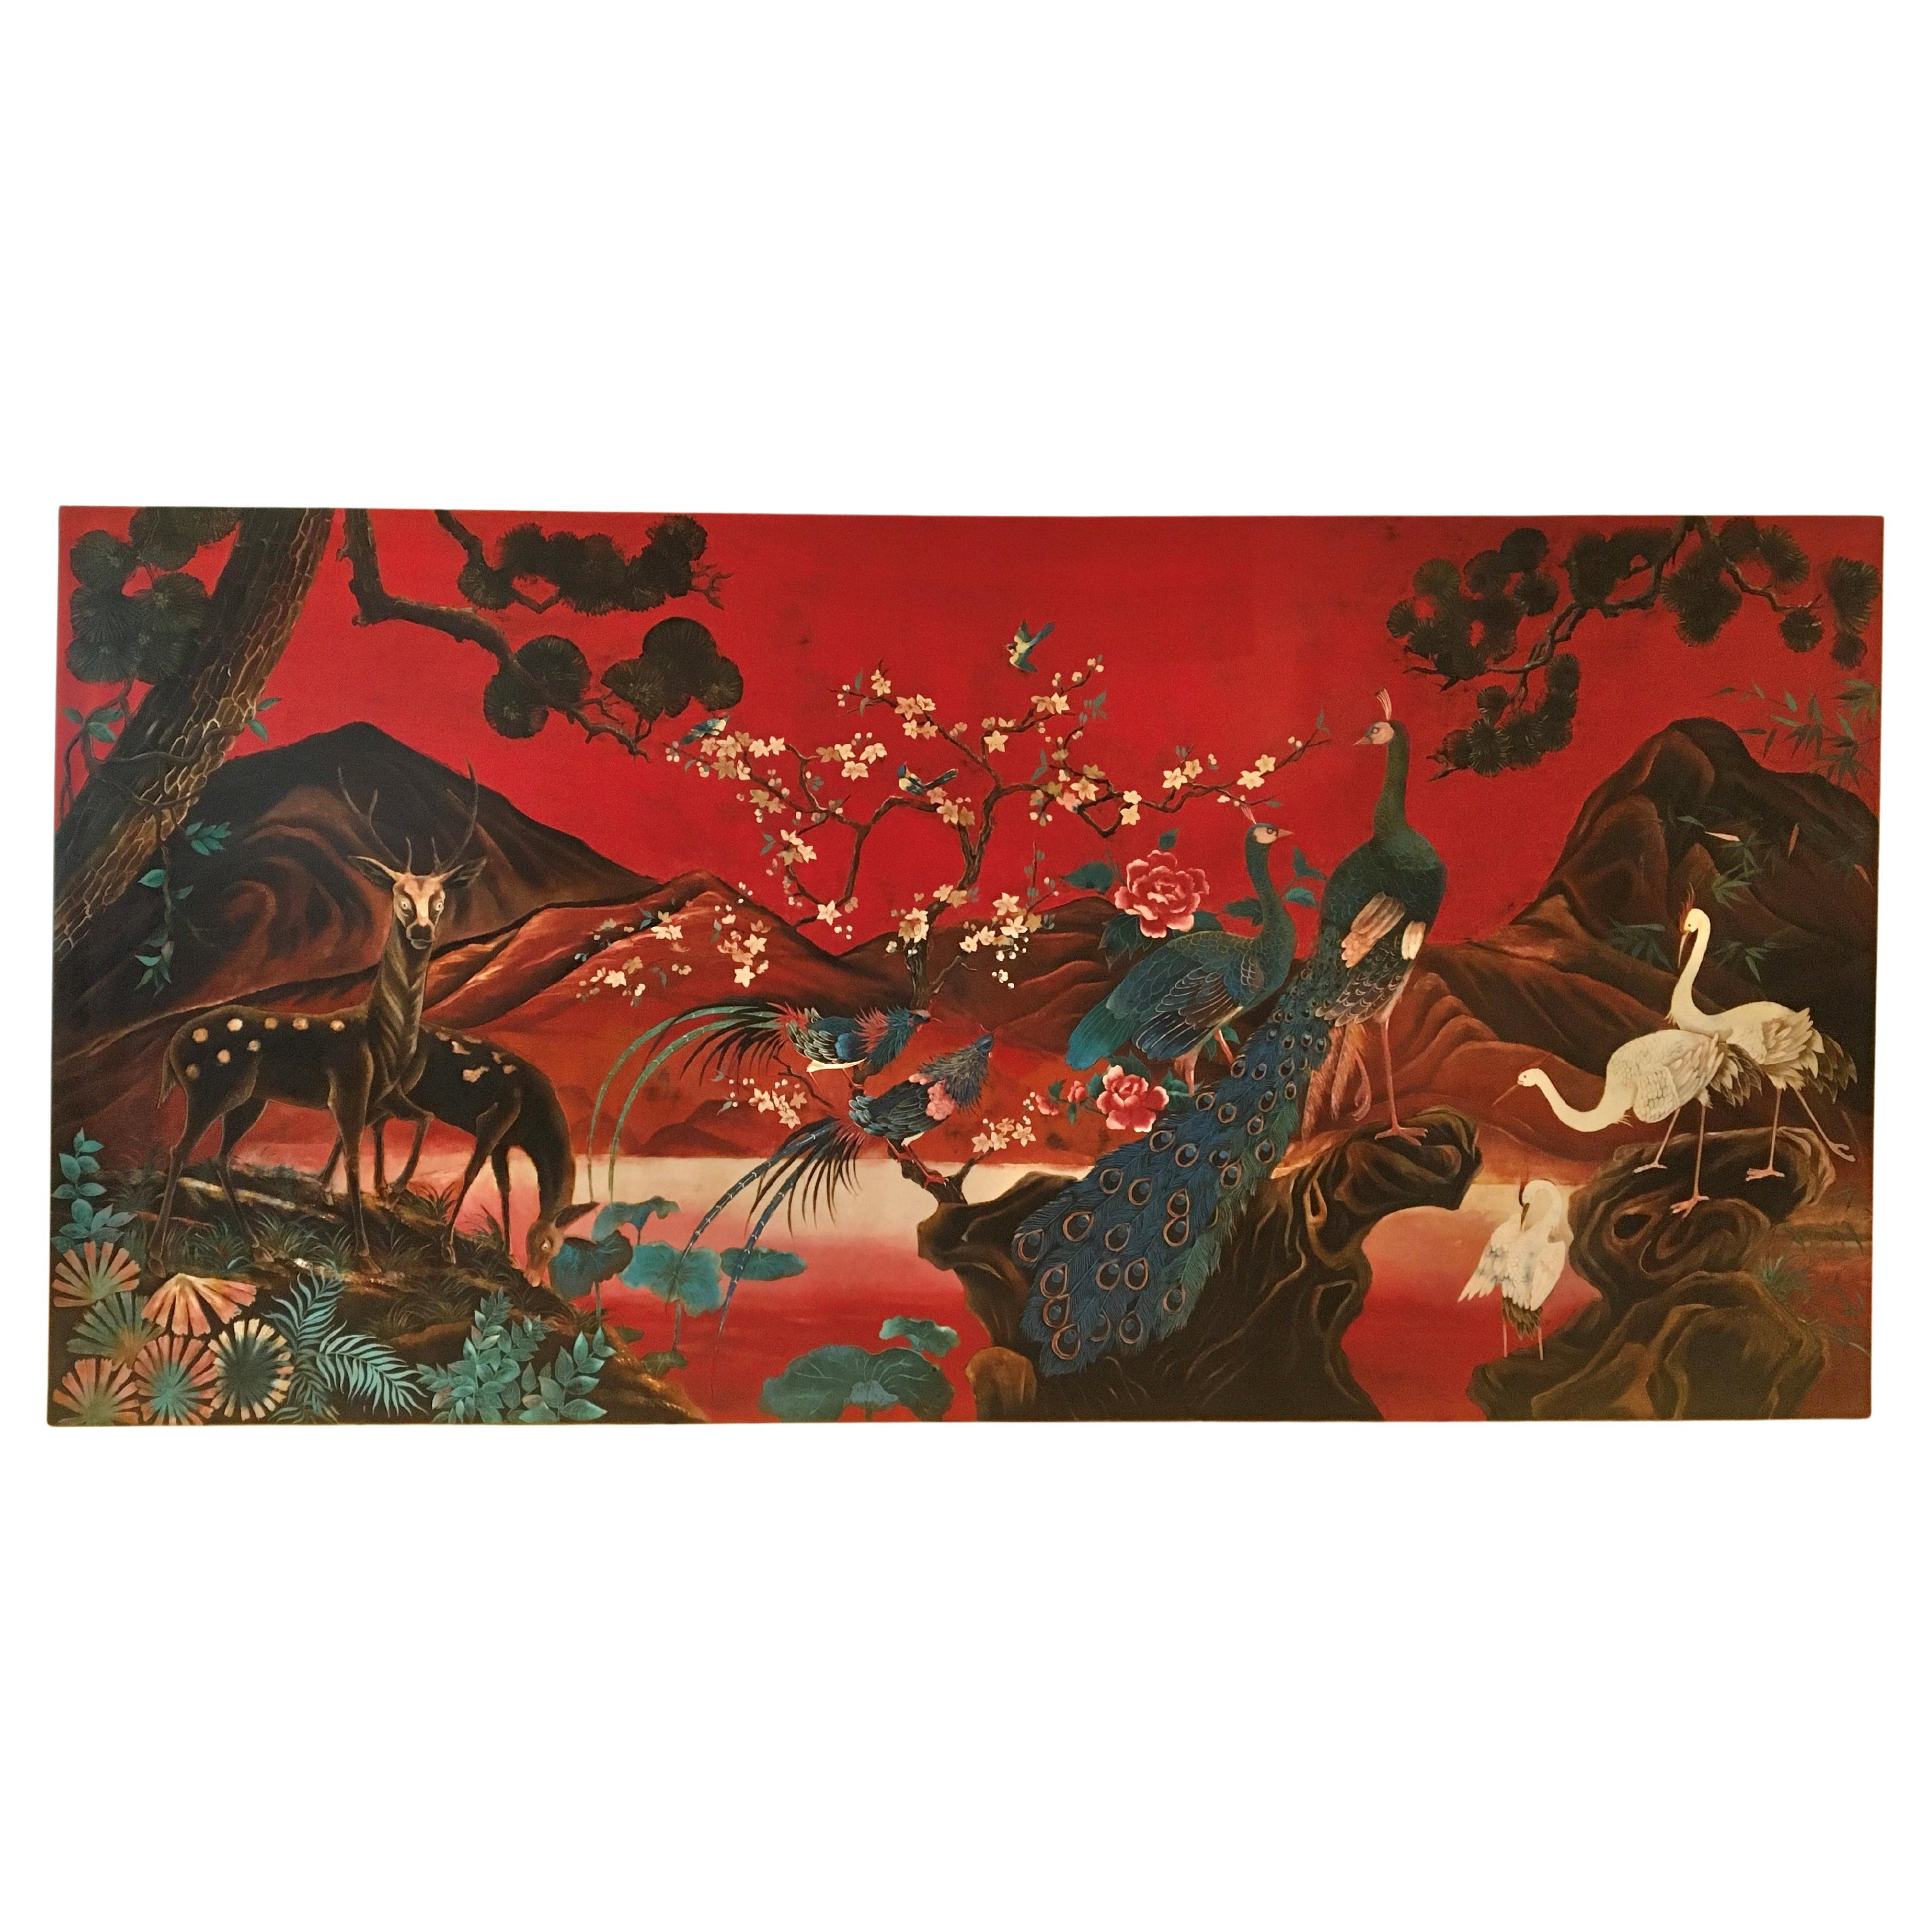 XL Asian Wall Panel with Peacock, Birds of Paradise, Cranes and Deers, 1990s For Sale